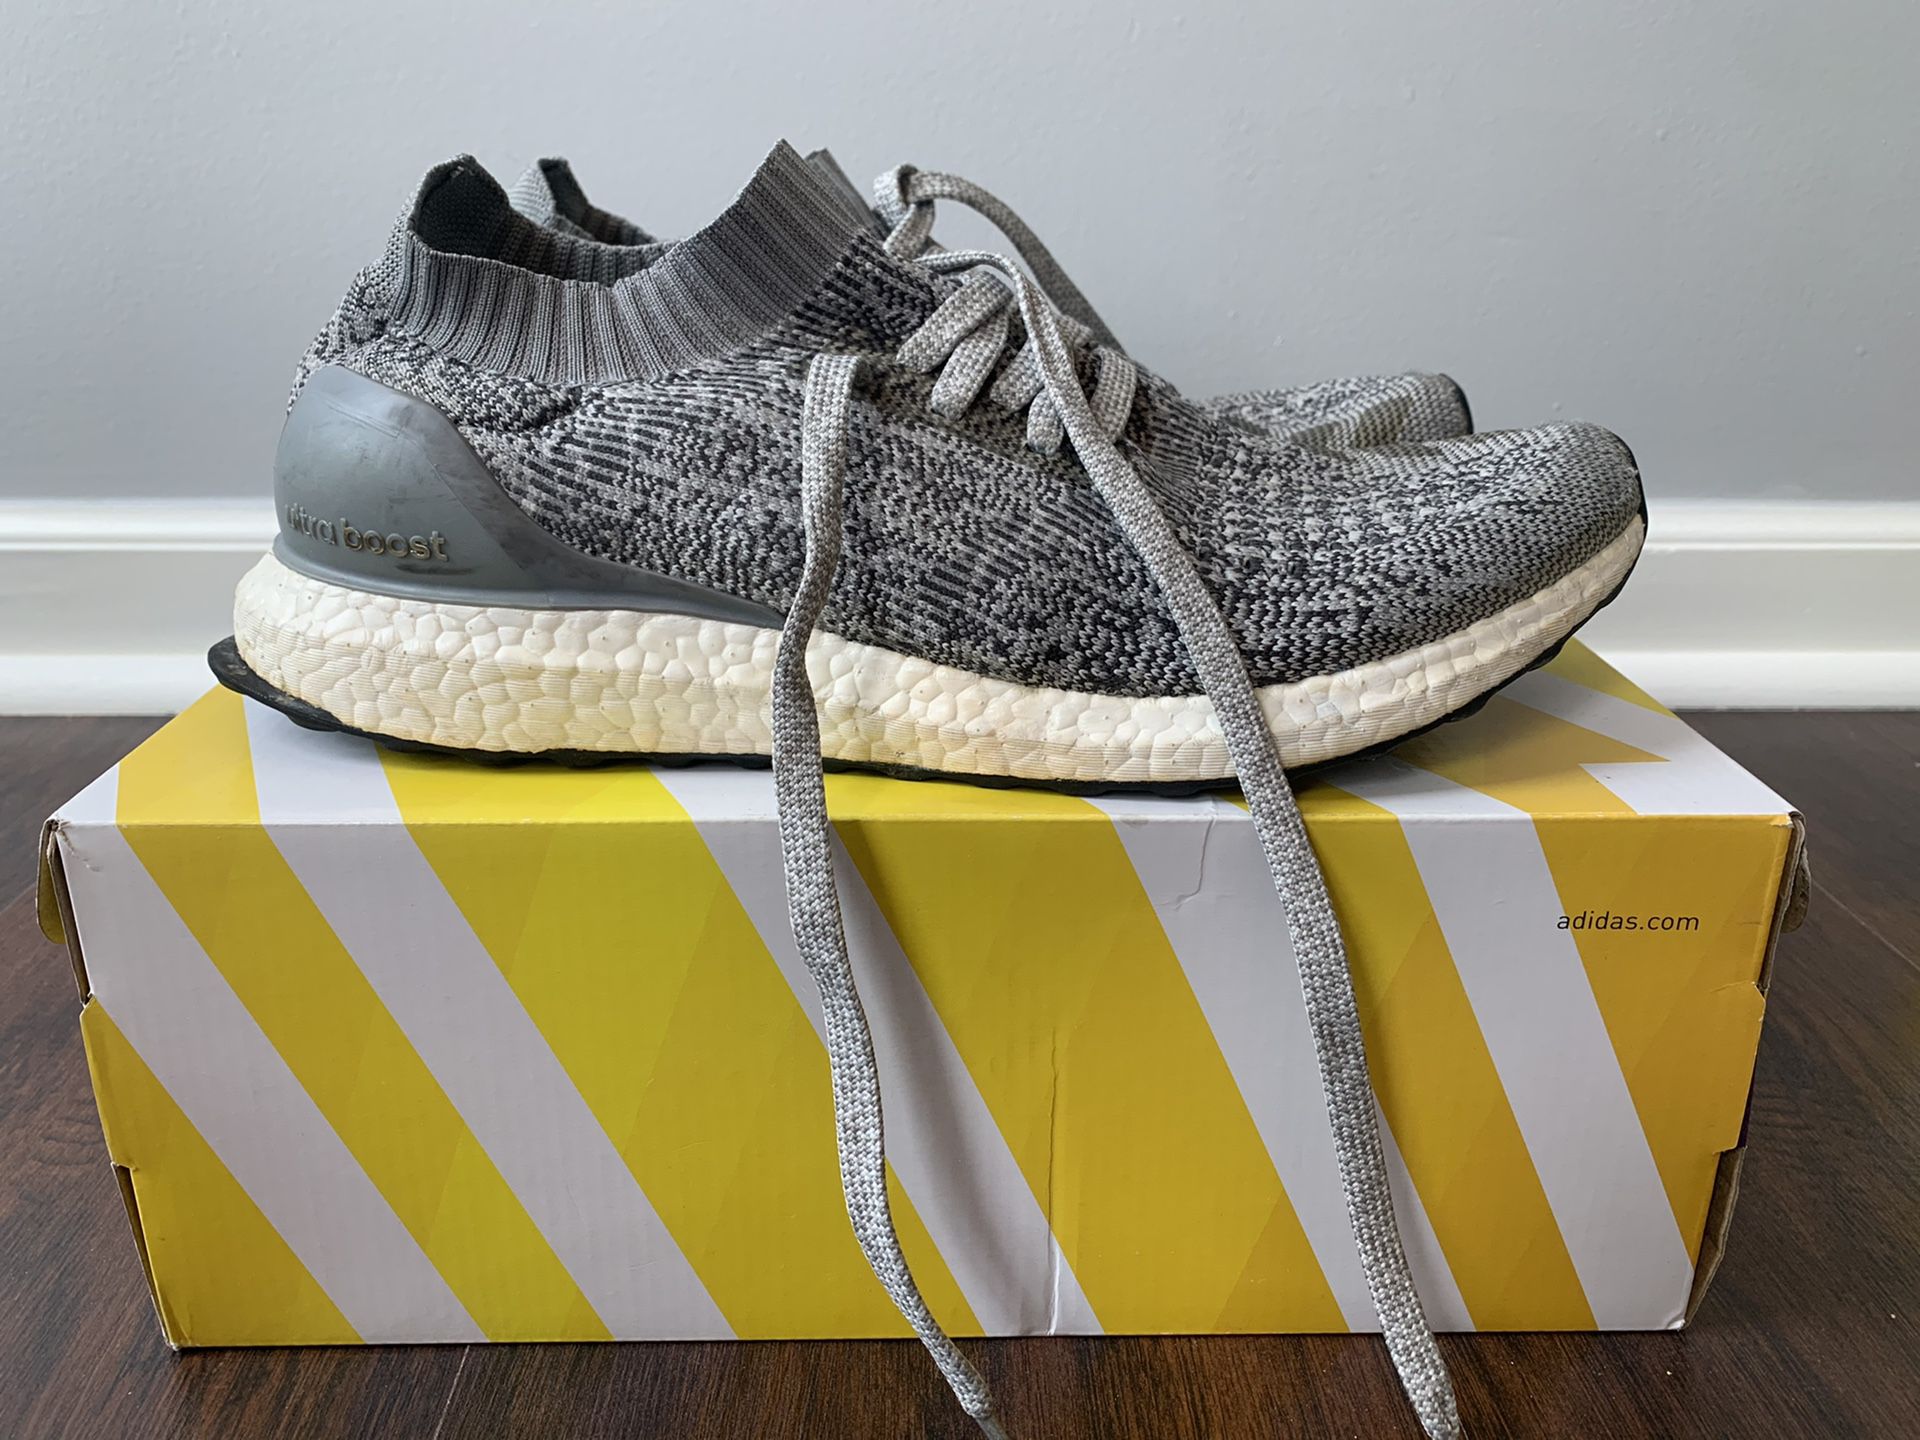 2017 Adidas Ultra Boost Uncaged Grey Two Sneakers w/ Original Box Men’s Size 10.5